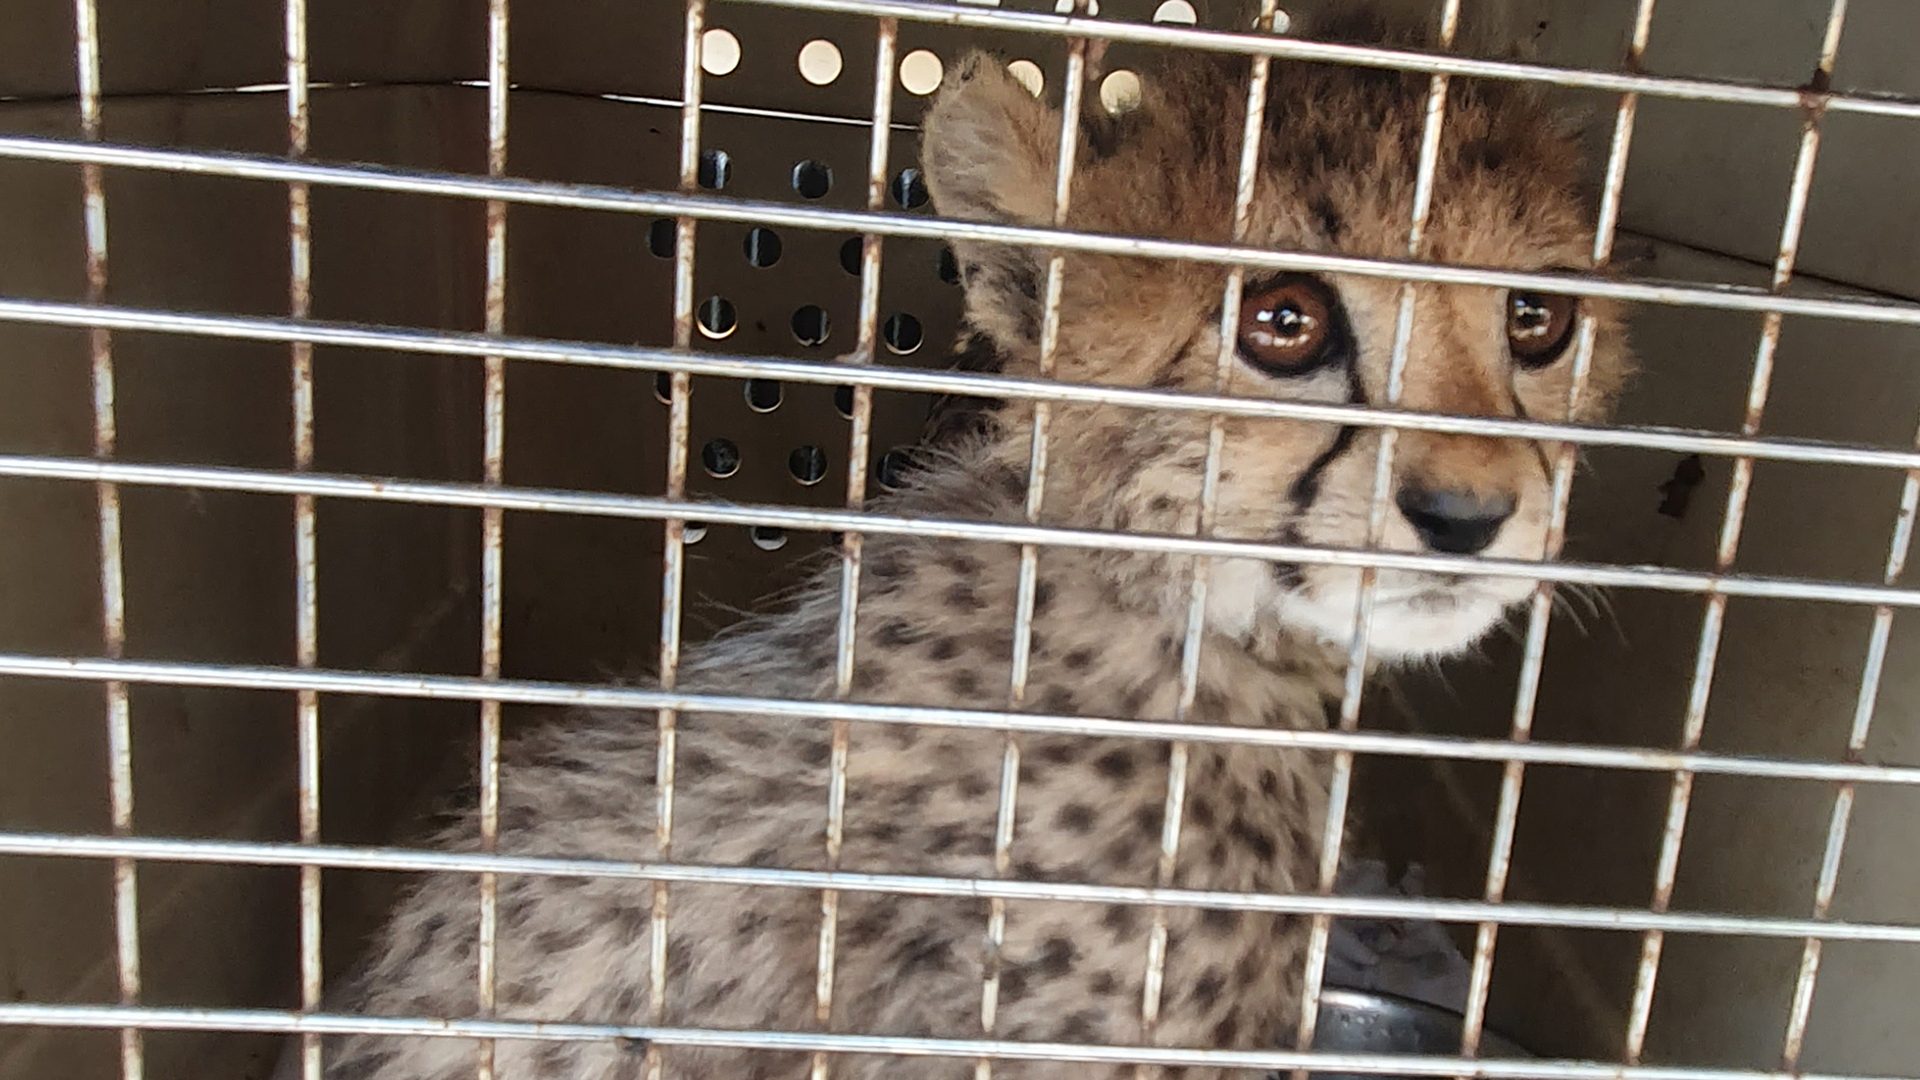 A cheetah cub is sitting in a small animal carrier behind a metal grid door